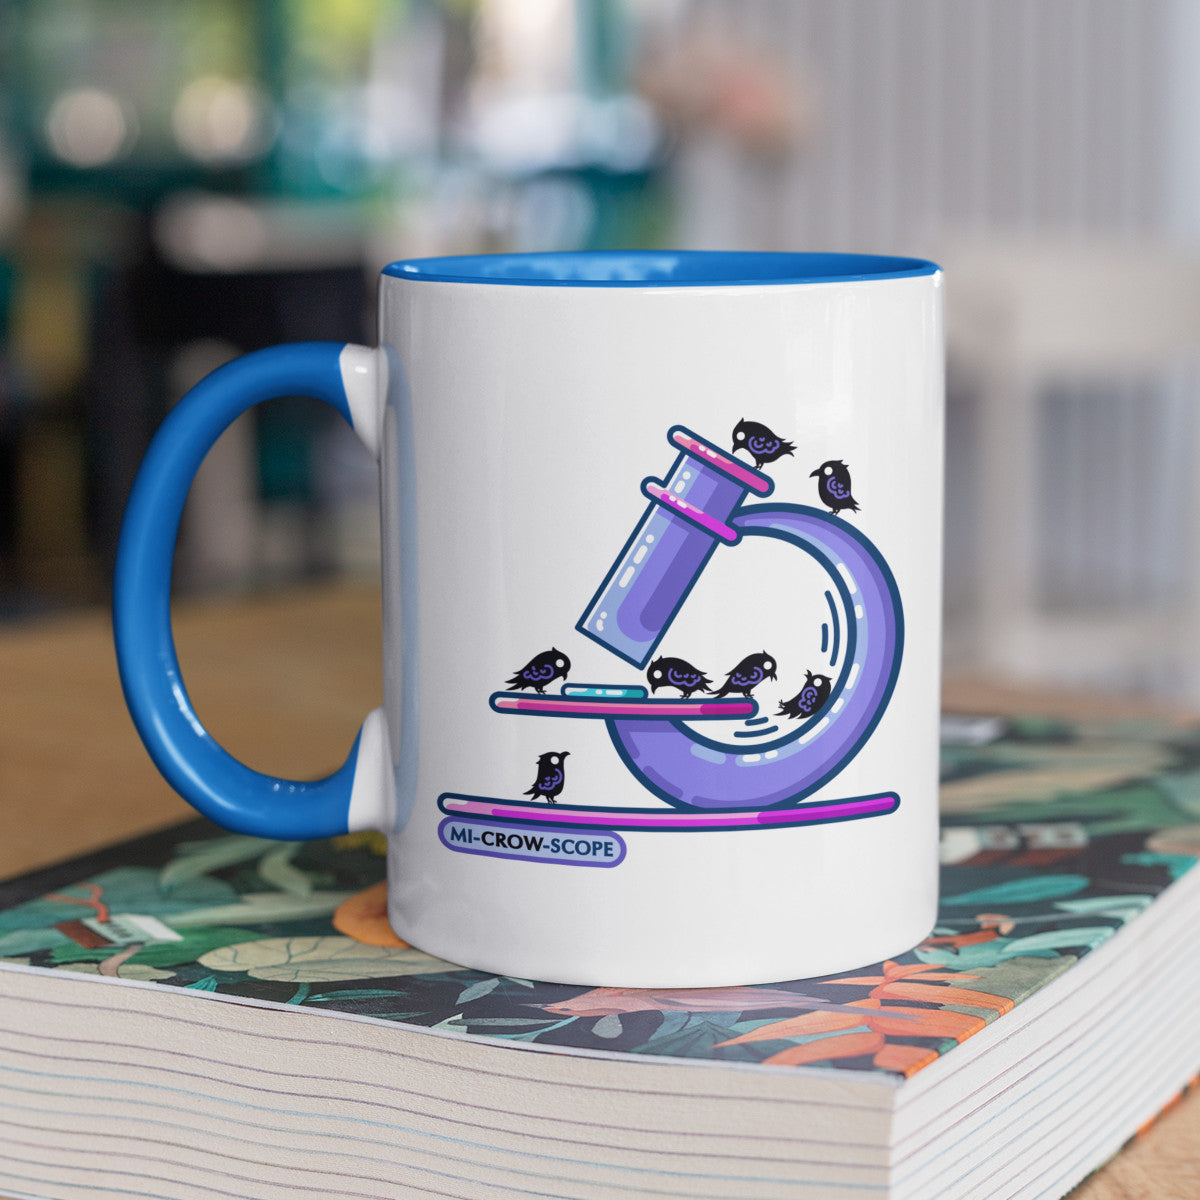 A two-toned white and blue ceramic mug standing on a book with a design printed on it of a purple microscope with crows standing on it.